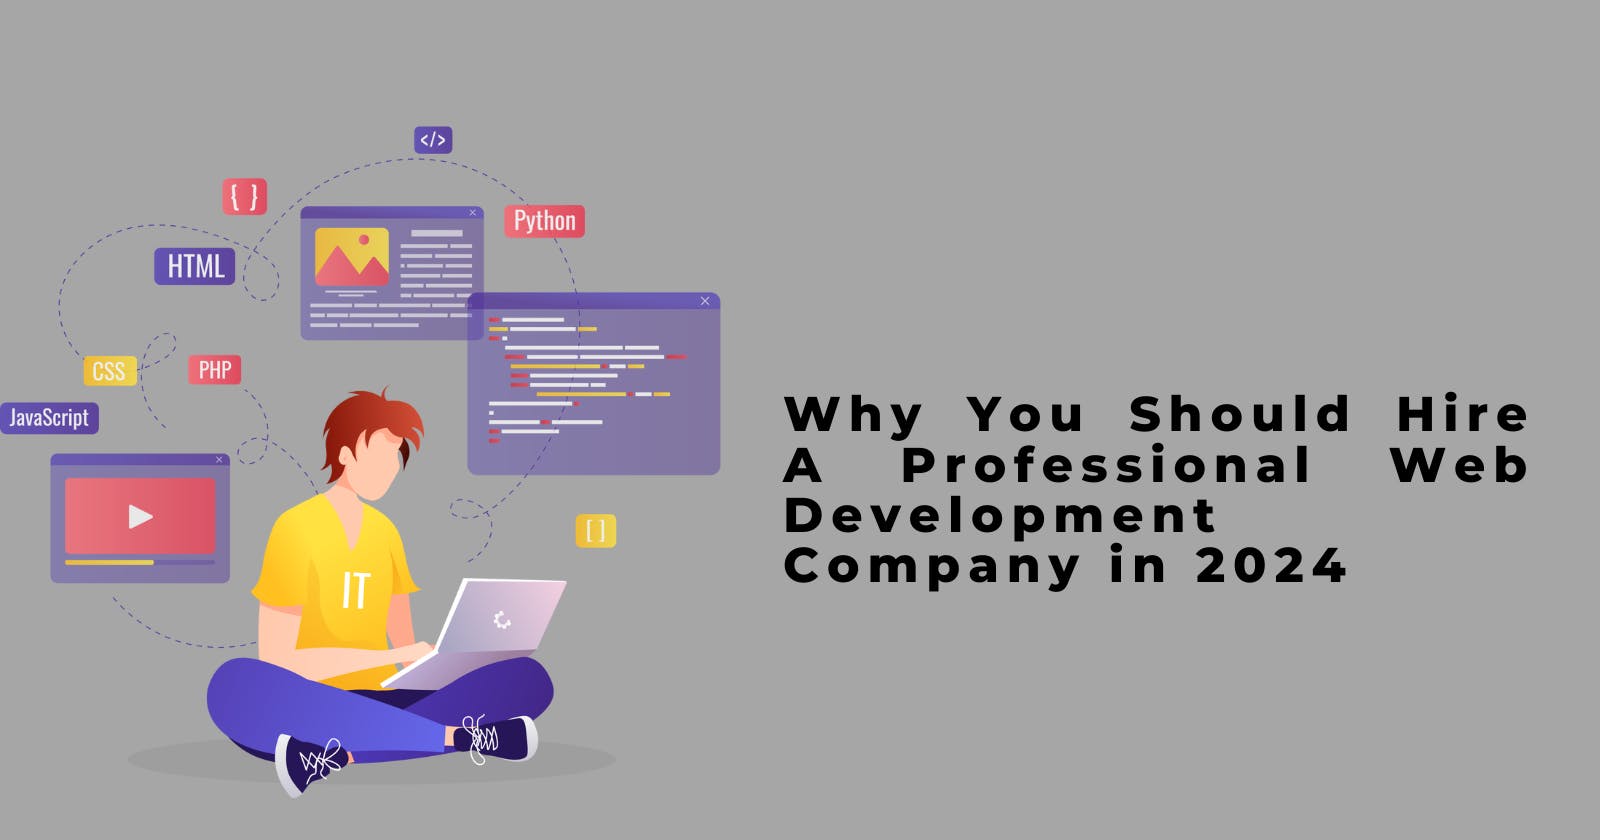 10 Reasons Why You Should Hire A Professional Web Development Company in 2024